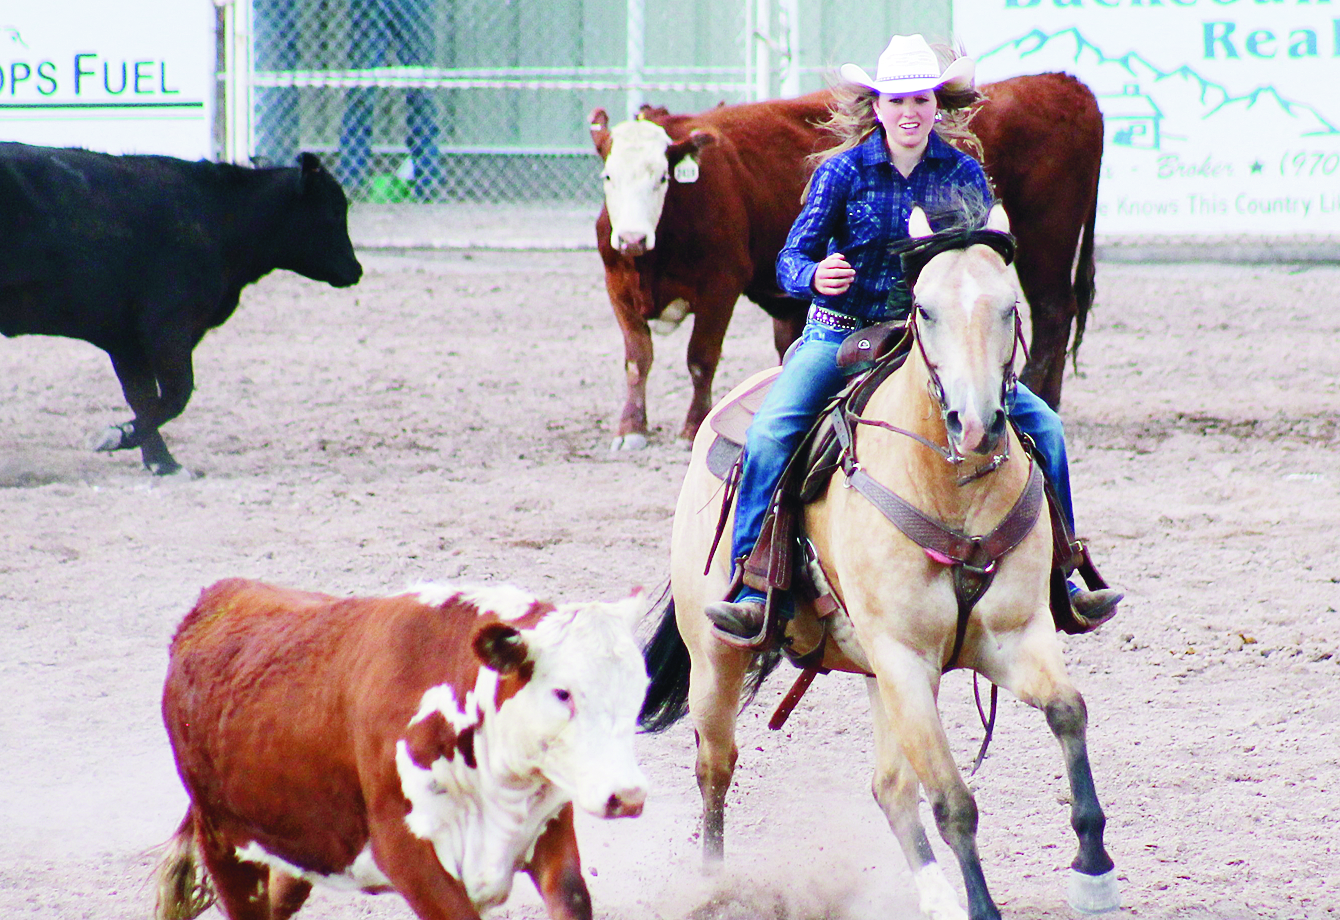 hallie blunt Lori Ann Klinglesmith captured first place in the working cow horse competition, and here she is seen working the cows on Friday night as a pre-Rio Blanco County Fair event held at the county fairgrounds in Meeker. 